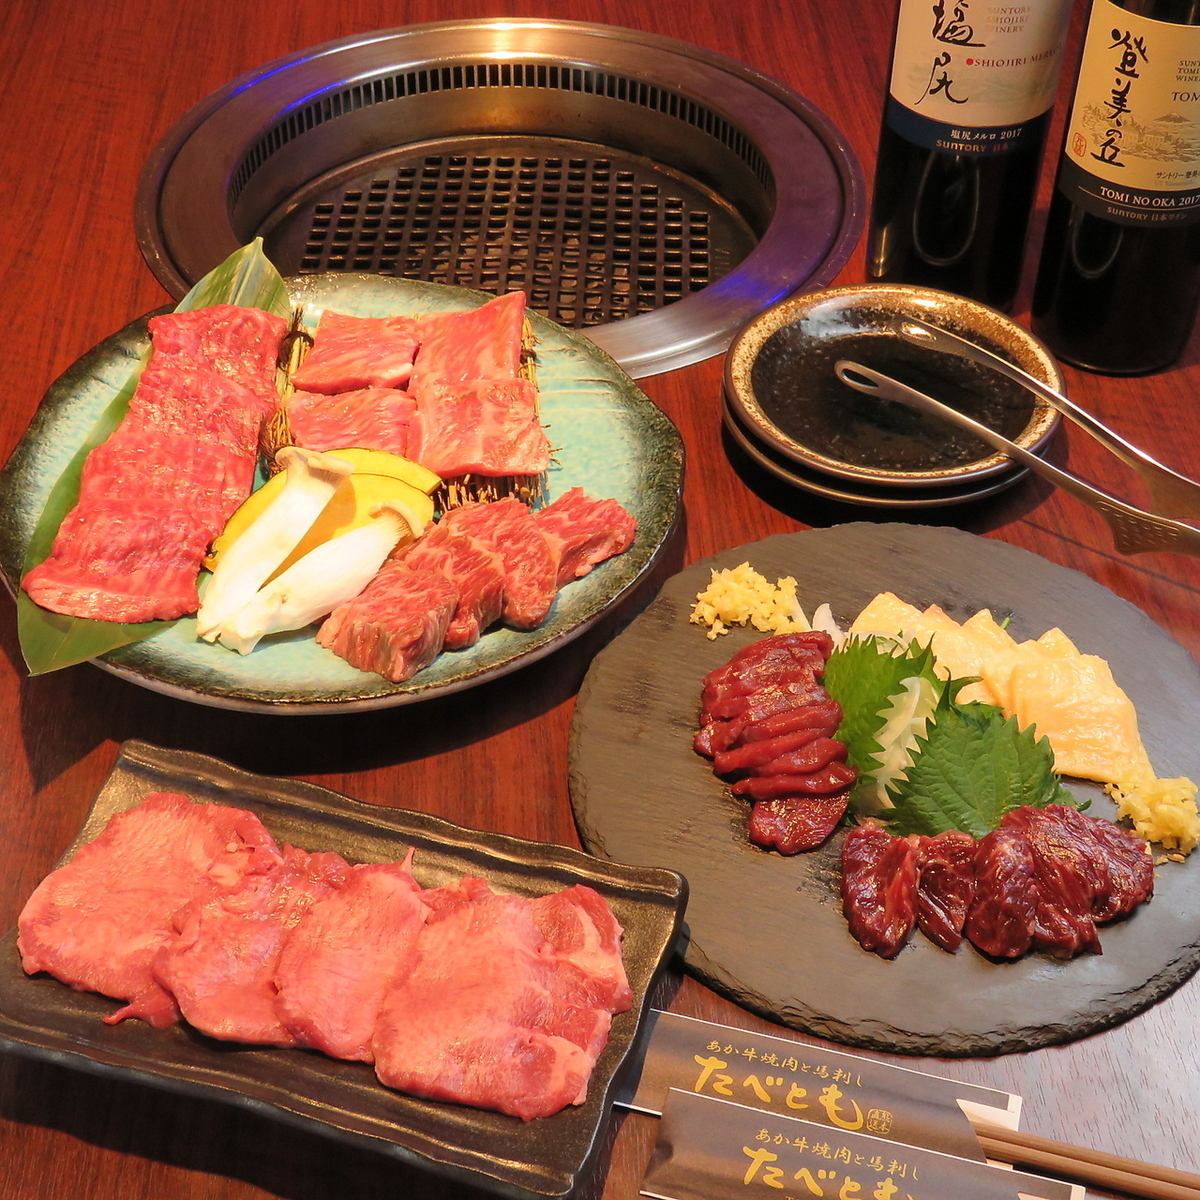 Immediately from Iidabashi Station! A super rare Japanese beef "Aka beef" and horse sashimi shop in Tokyo